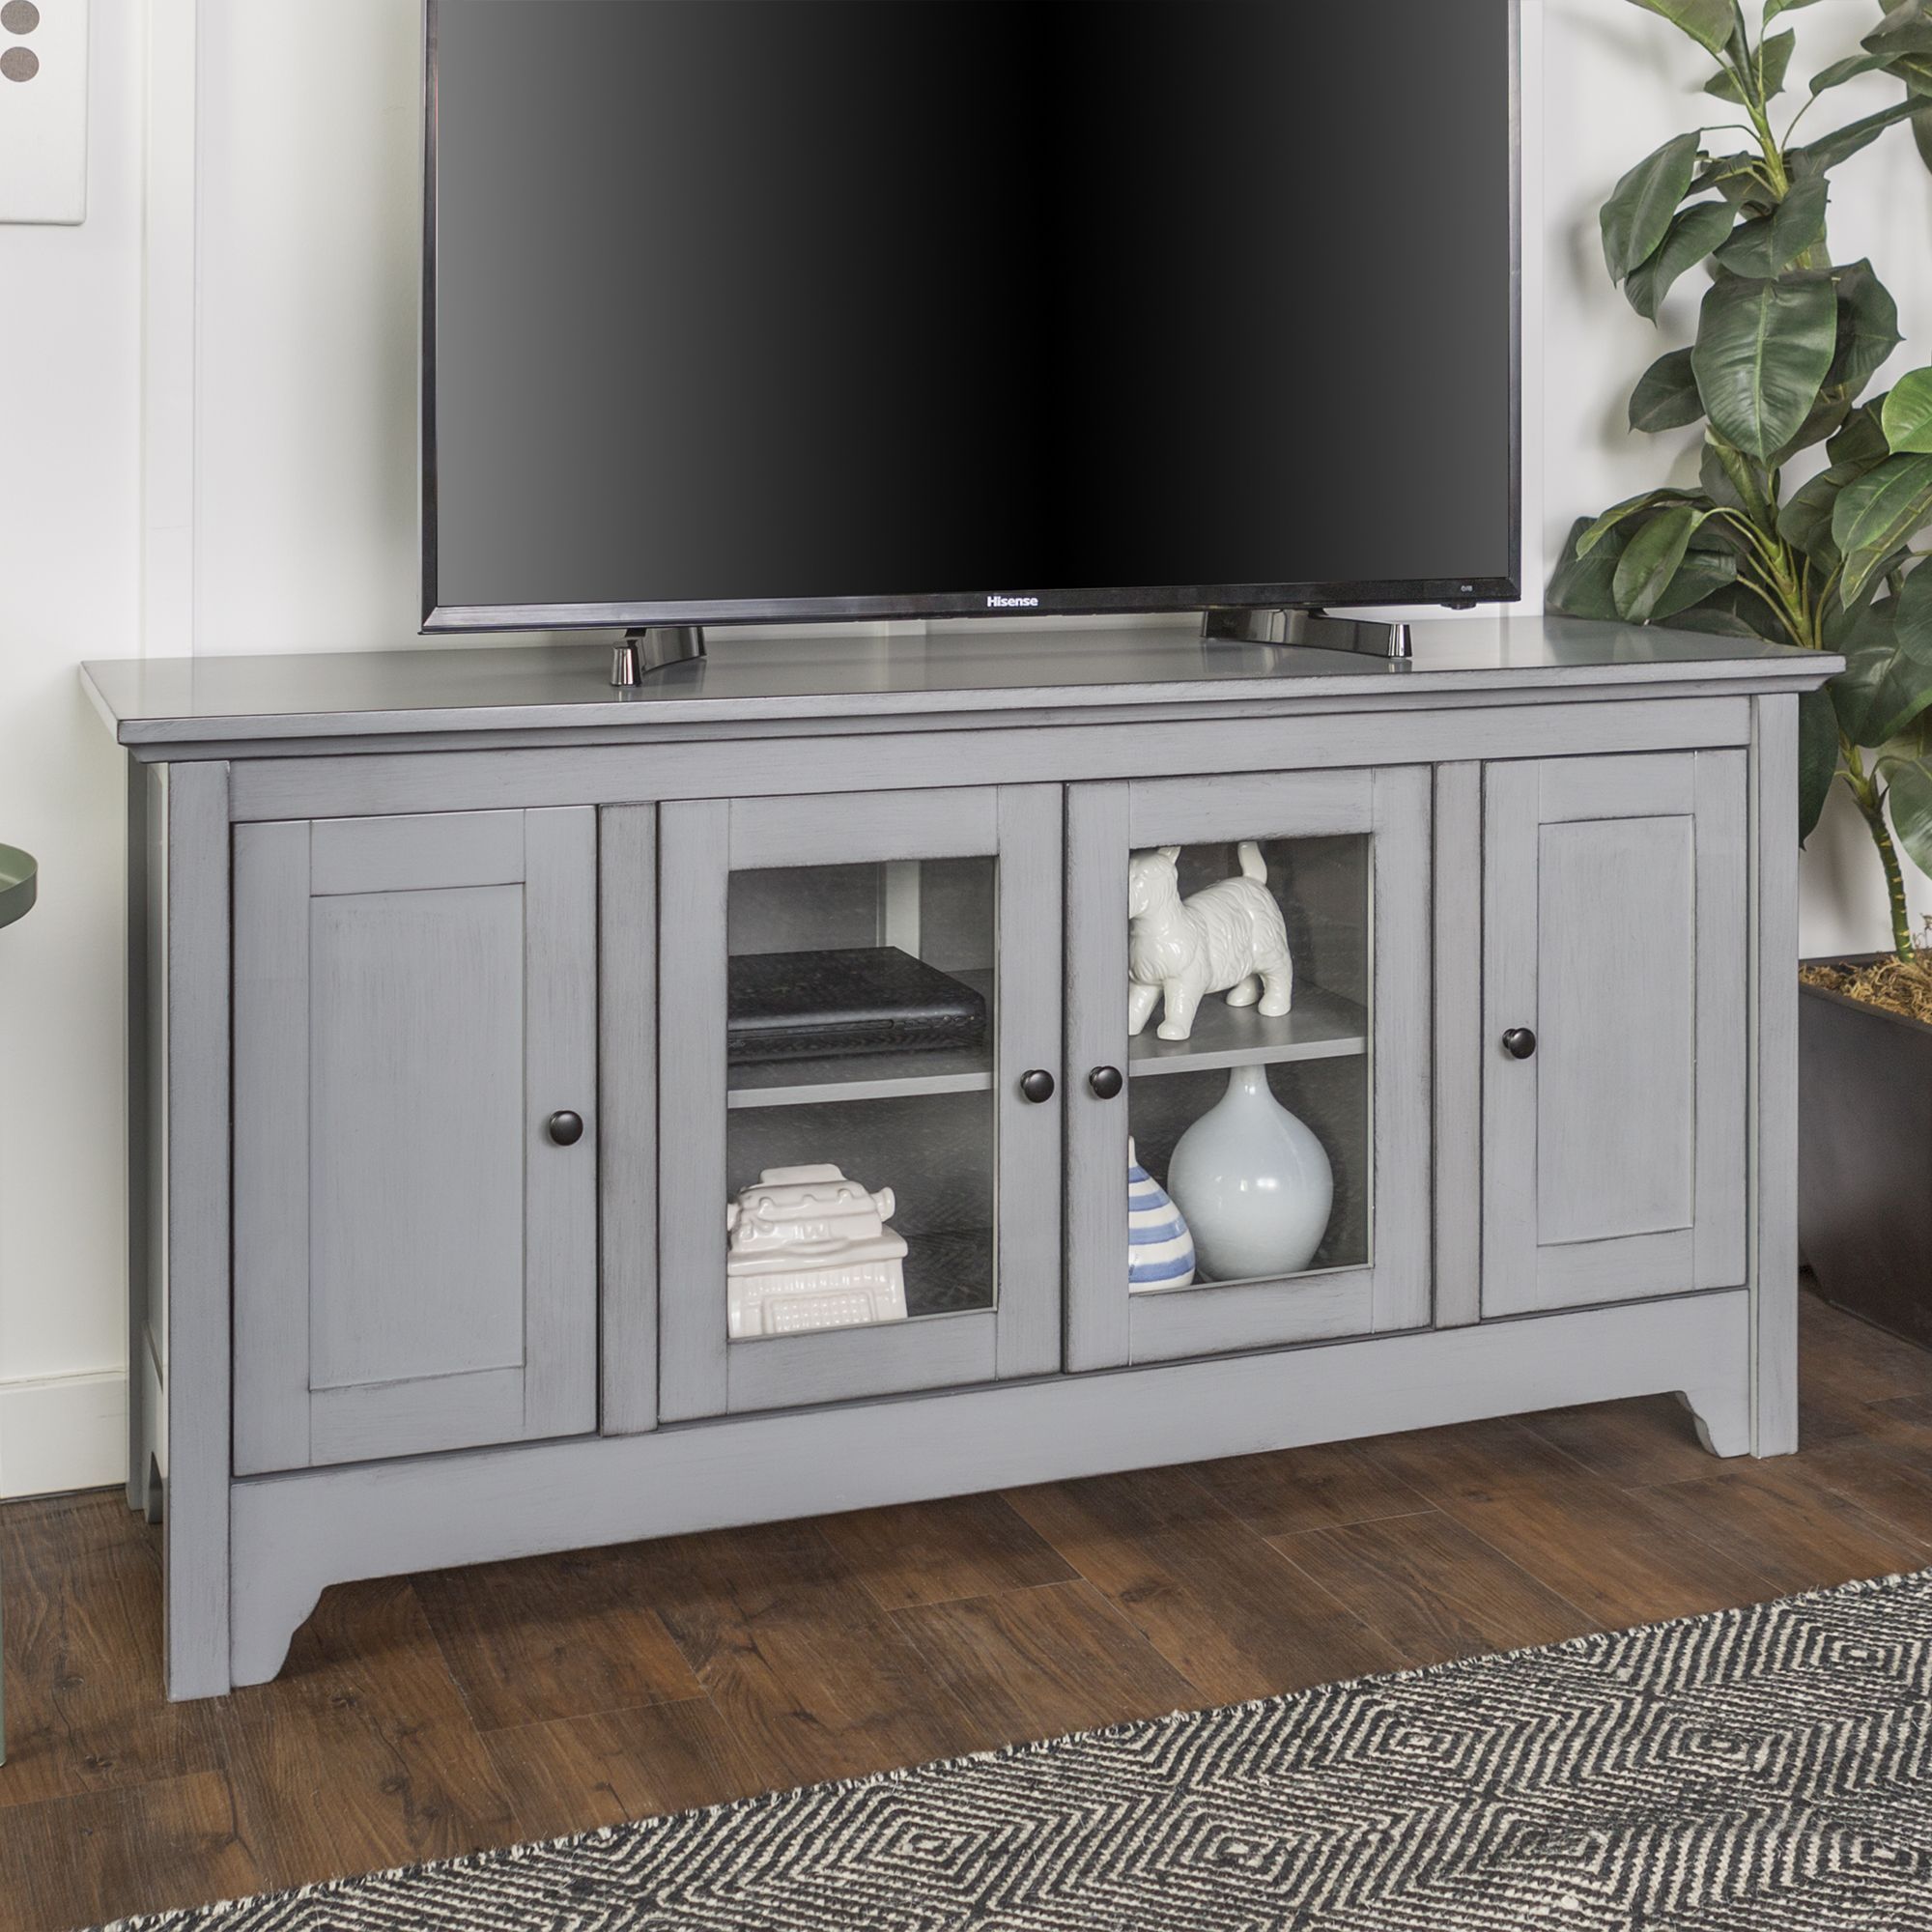 Walker Edison Antique Gray Wood Tv Stand For Tvs Up To 58" – Walmart For 110" Tvs Wood Tv Cabinet With Drawers (Gallery 18 of 20)